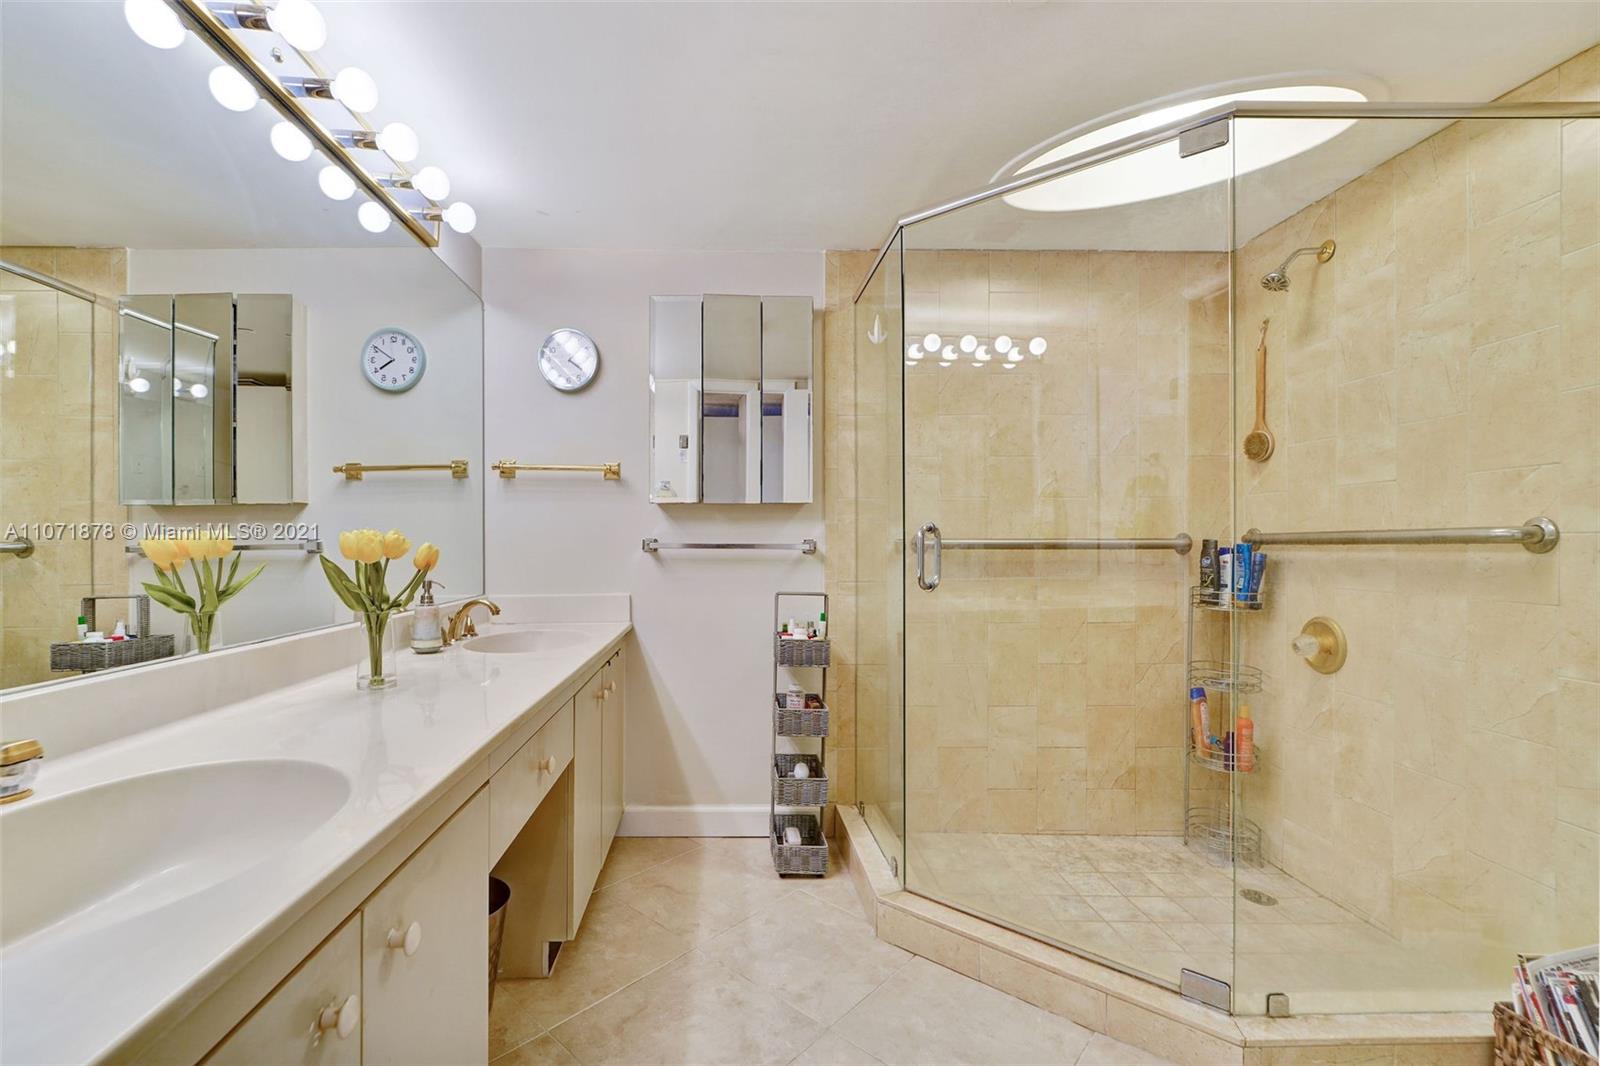 a bathroom with a granite countertop sink mirror and a shower